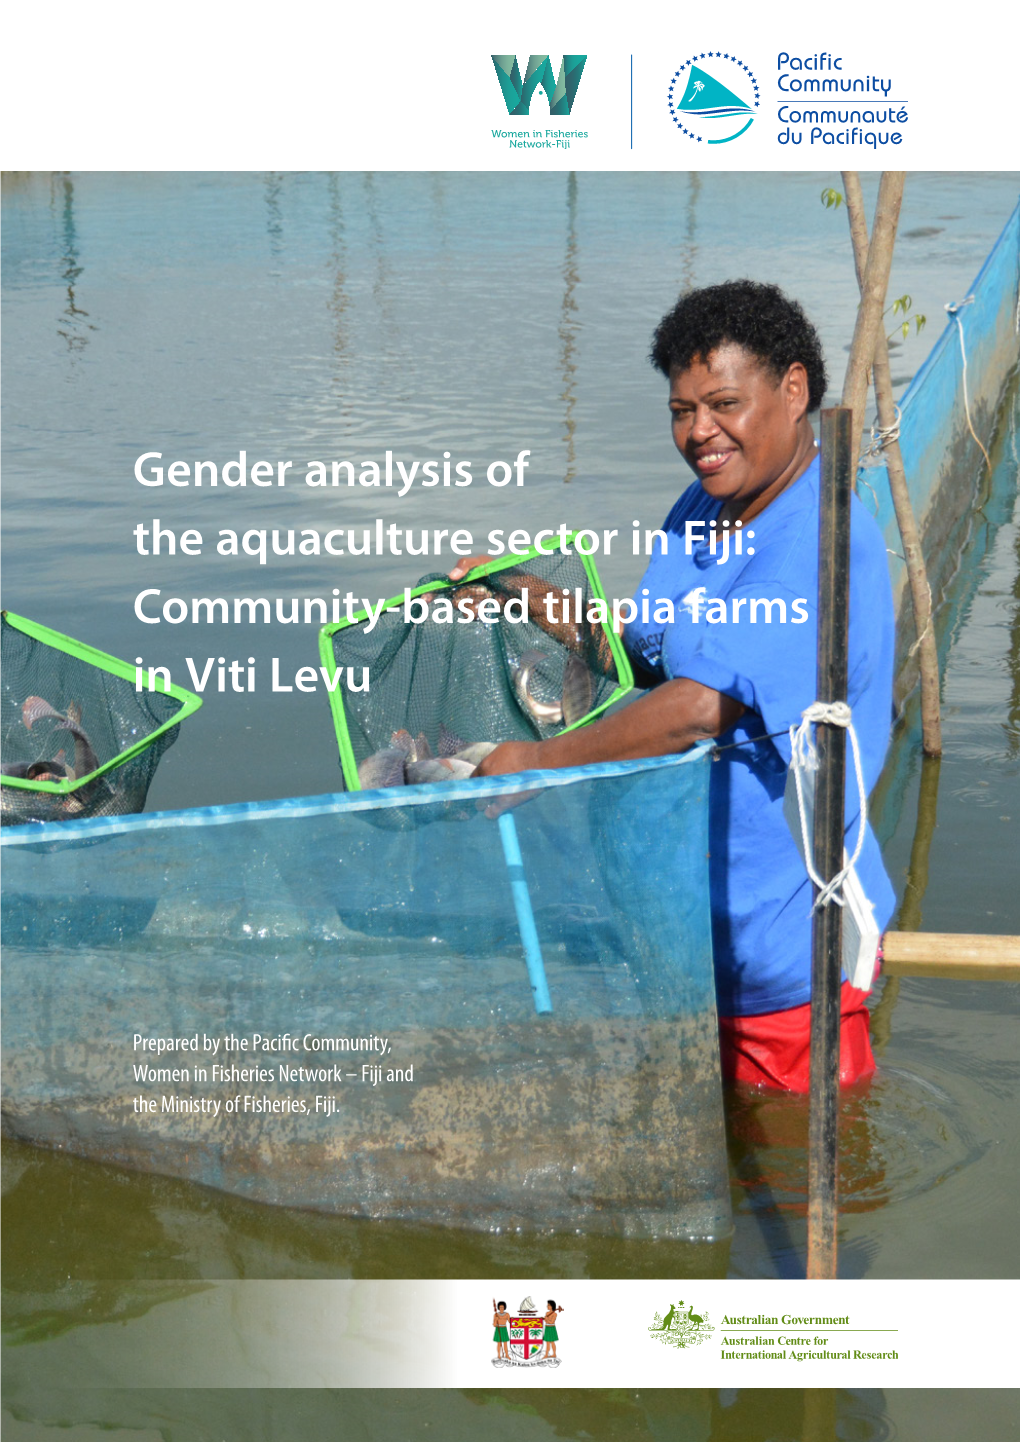 Gender Analysis of the Aquaculture Sector in Fiji